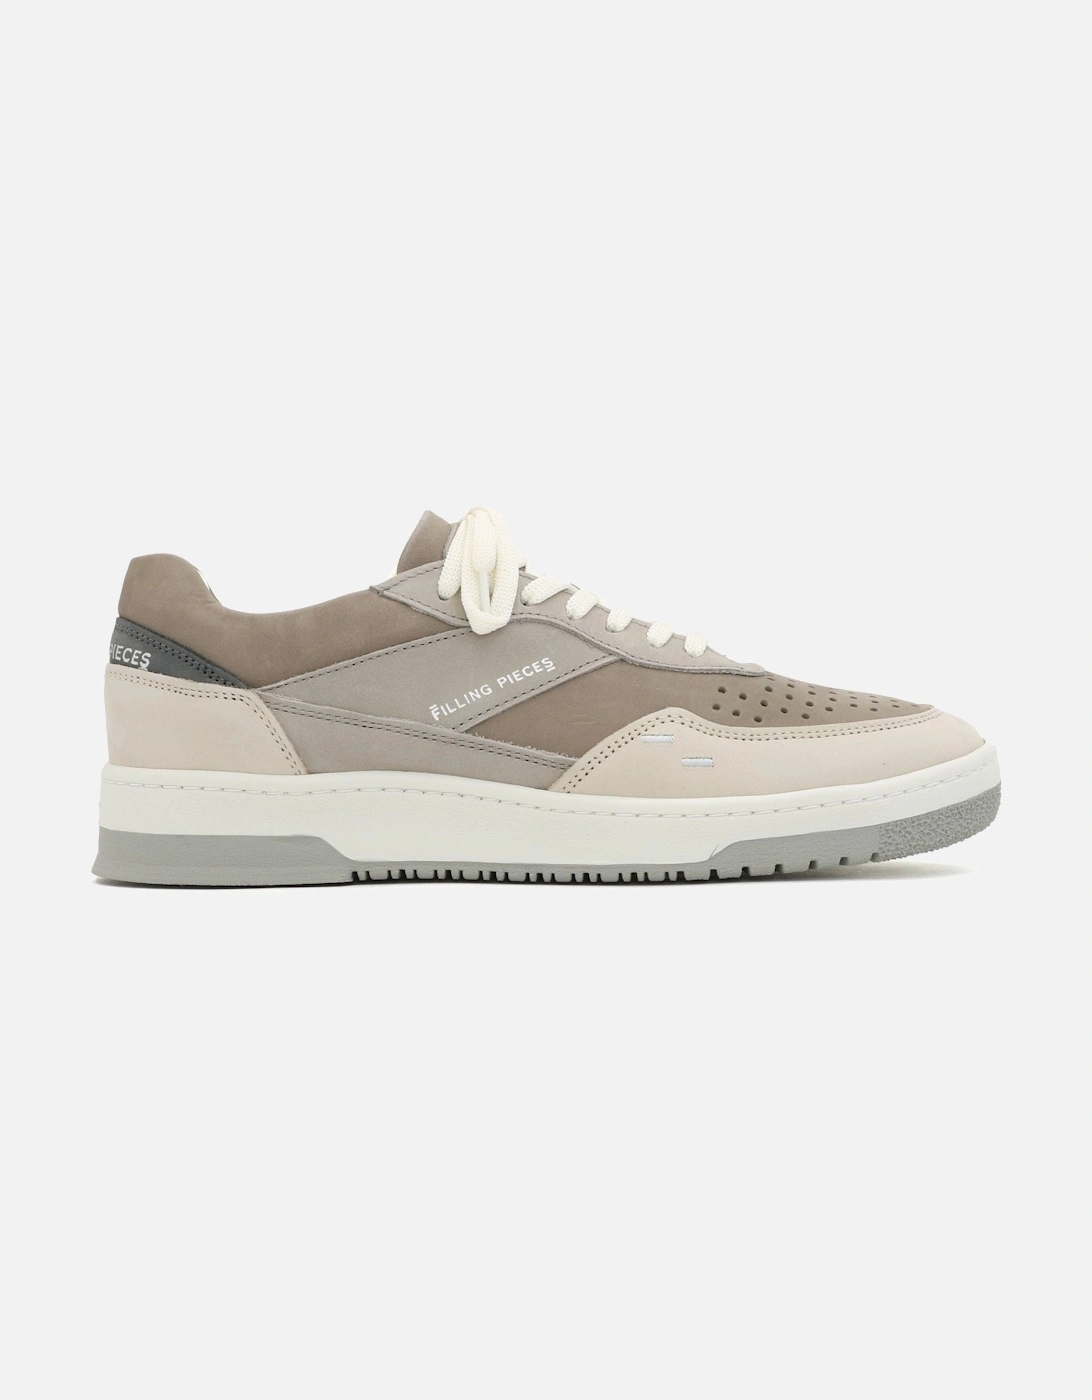 Ace Spin Taupe Trainer